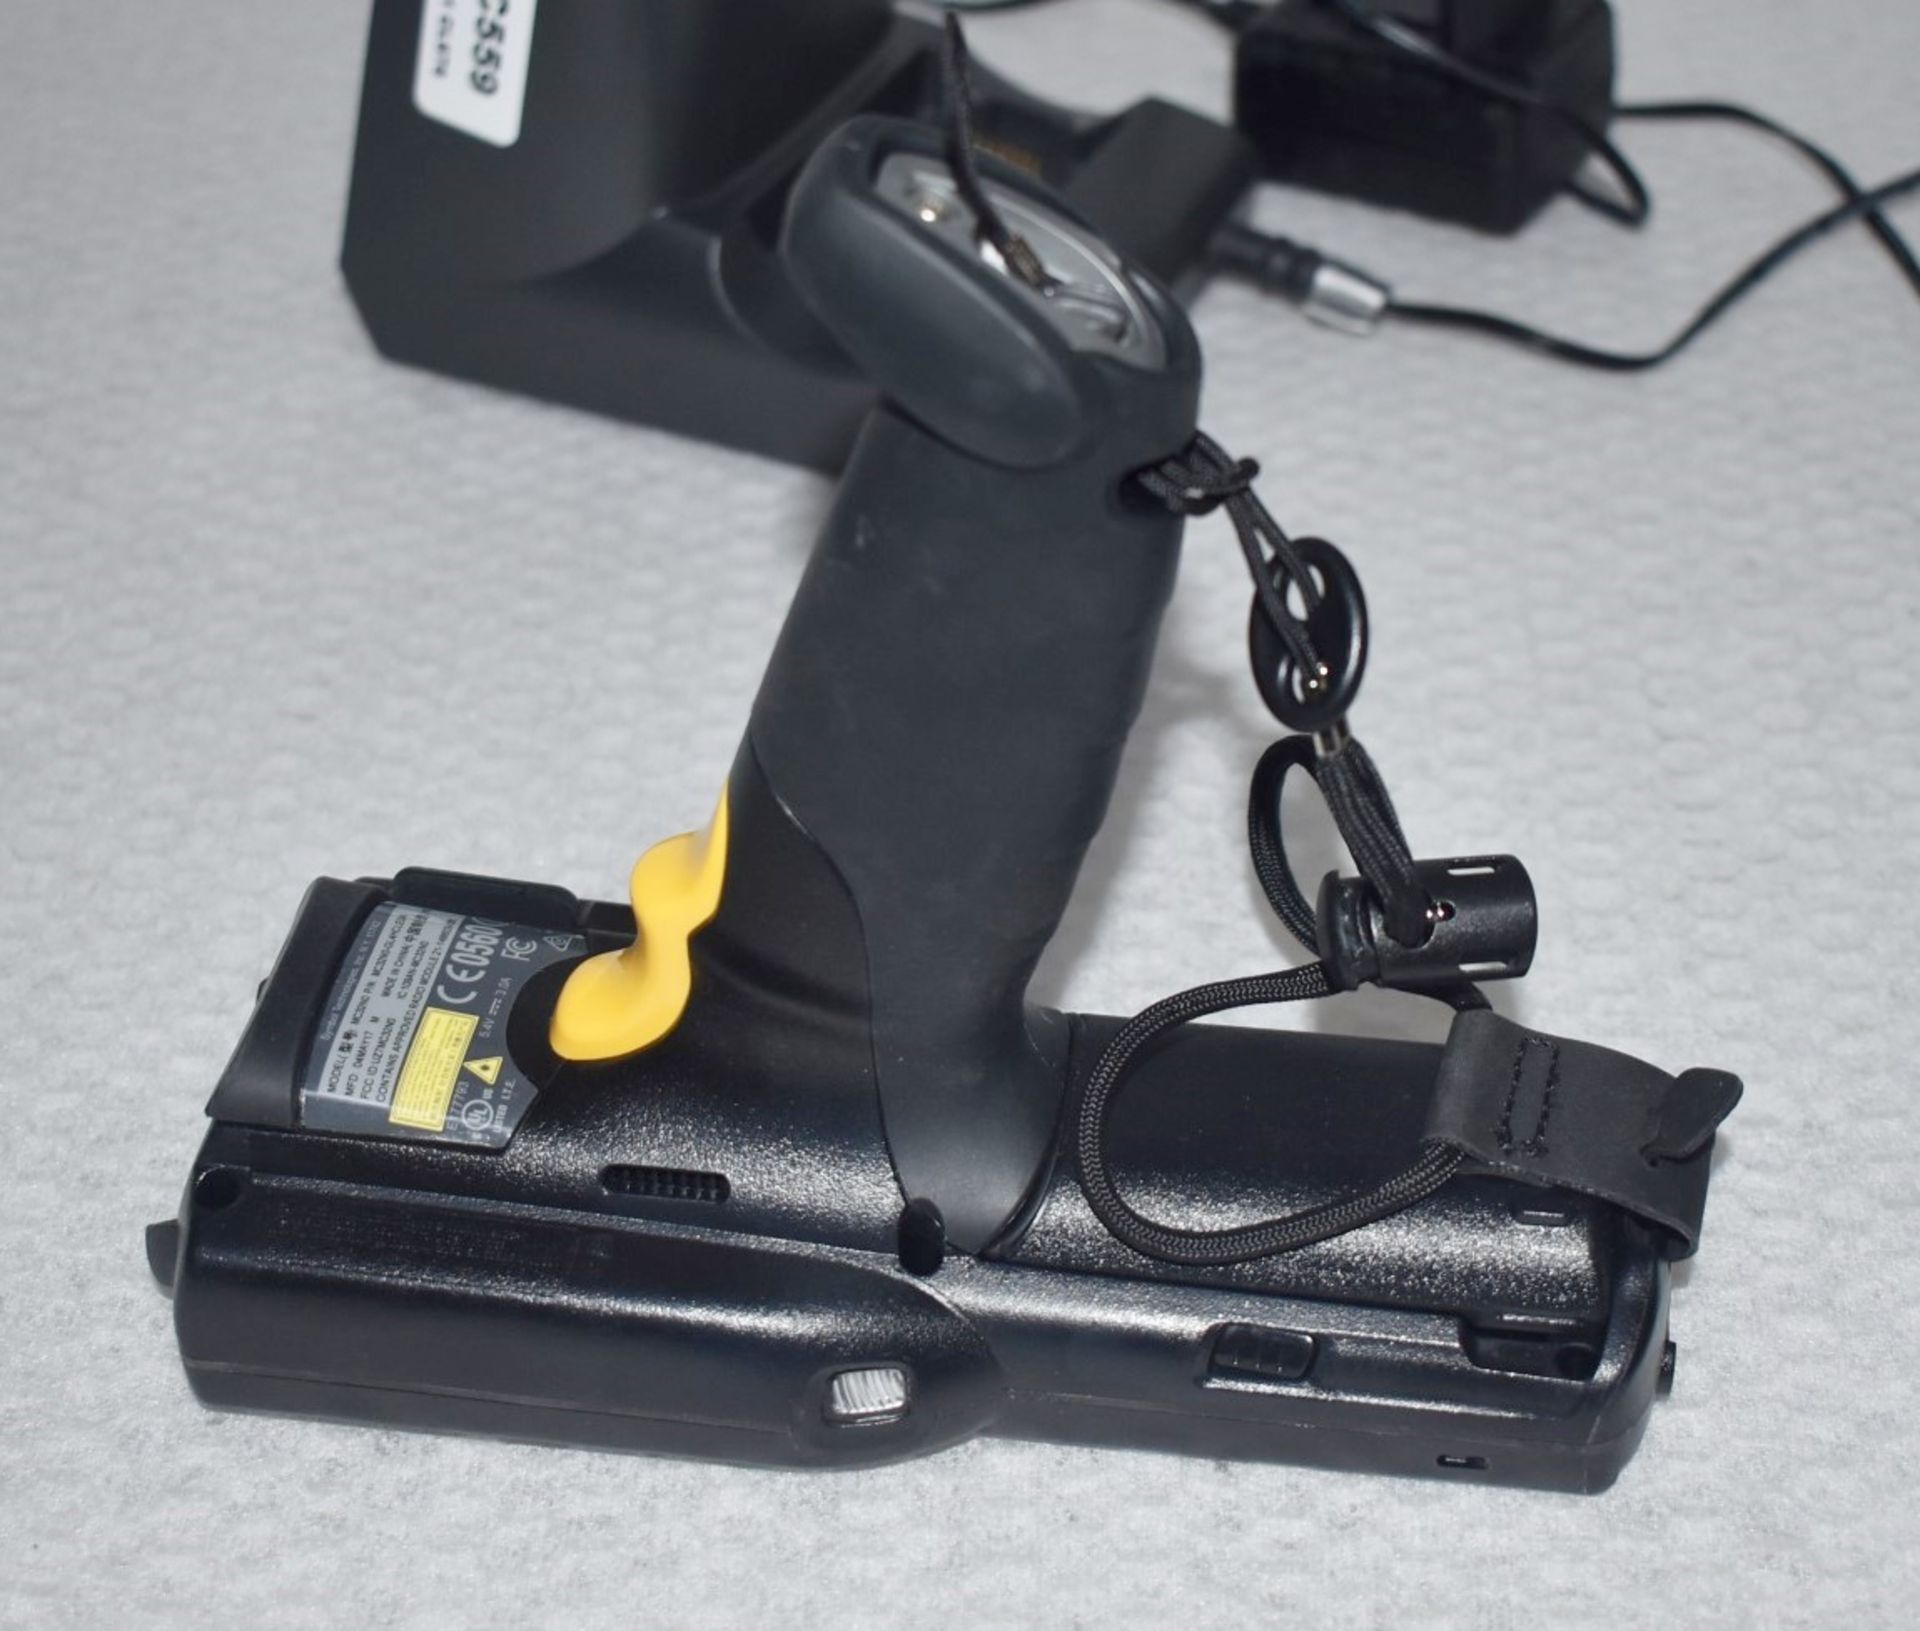 1 x Symbol MC3200 38 Key Laser Scanner With Docking Station - Features Windows Compact OS, - Image 4 of 10